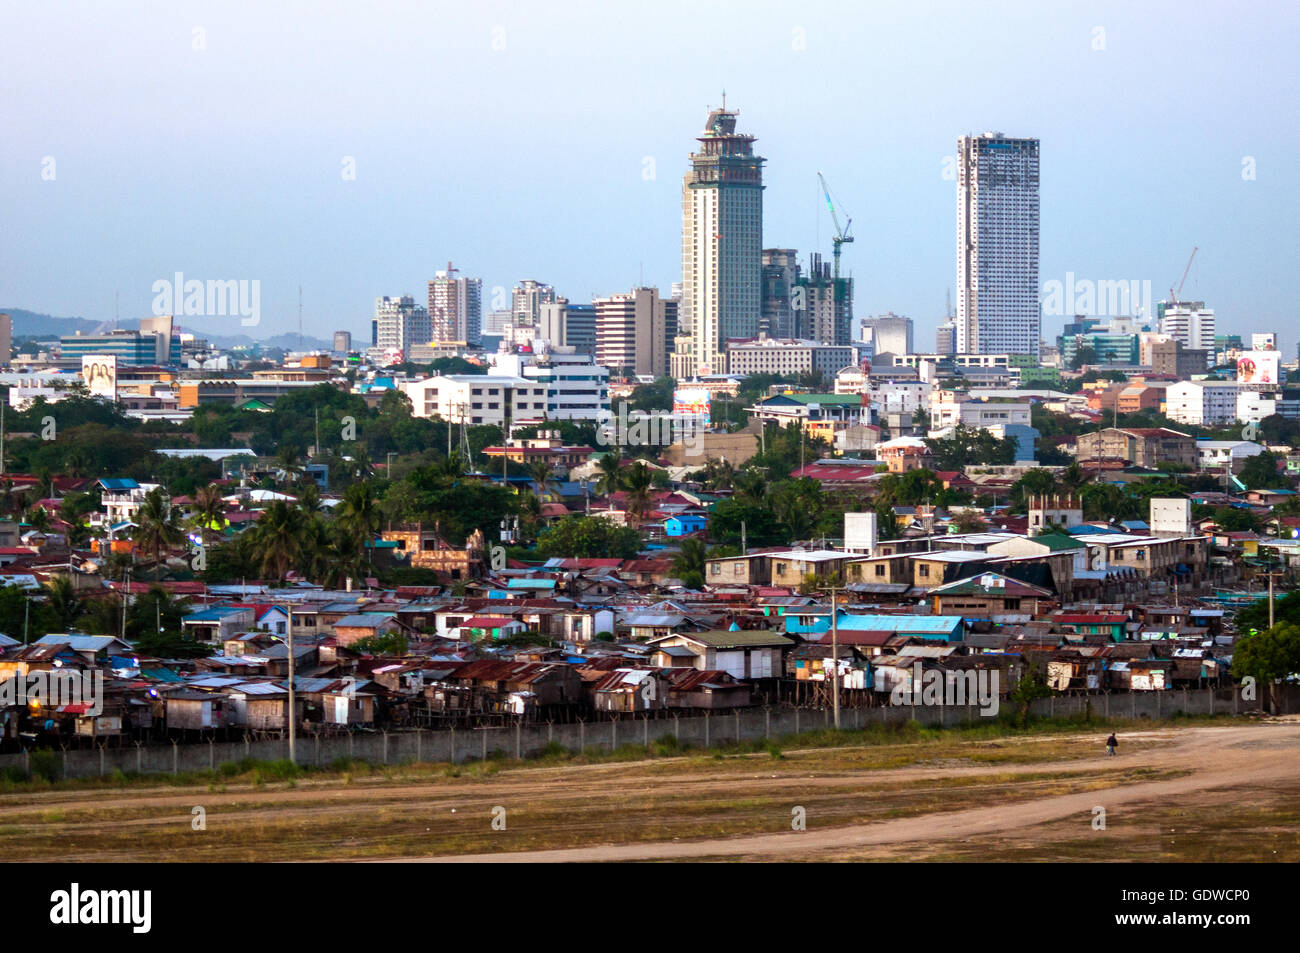 Aerial view of City skyline with low cost housing in foreground, seen from southwest, Cebu City, Philippines Stock Photo